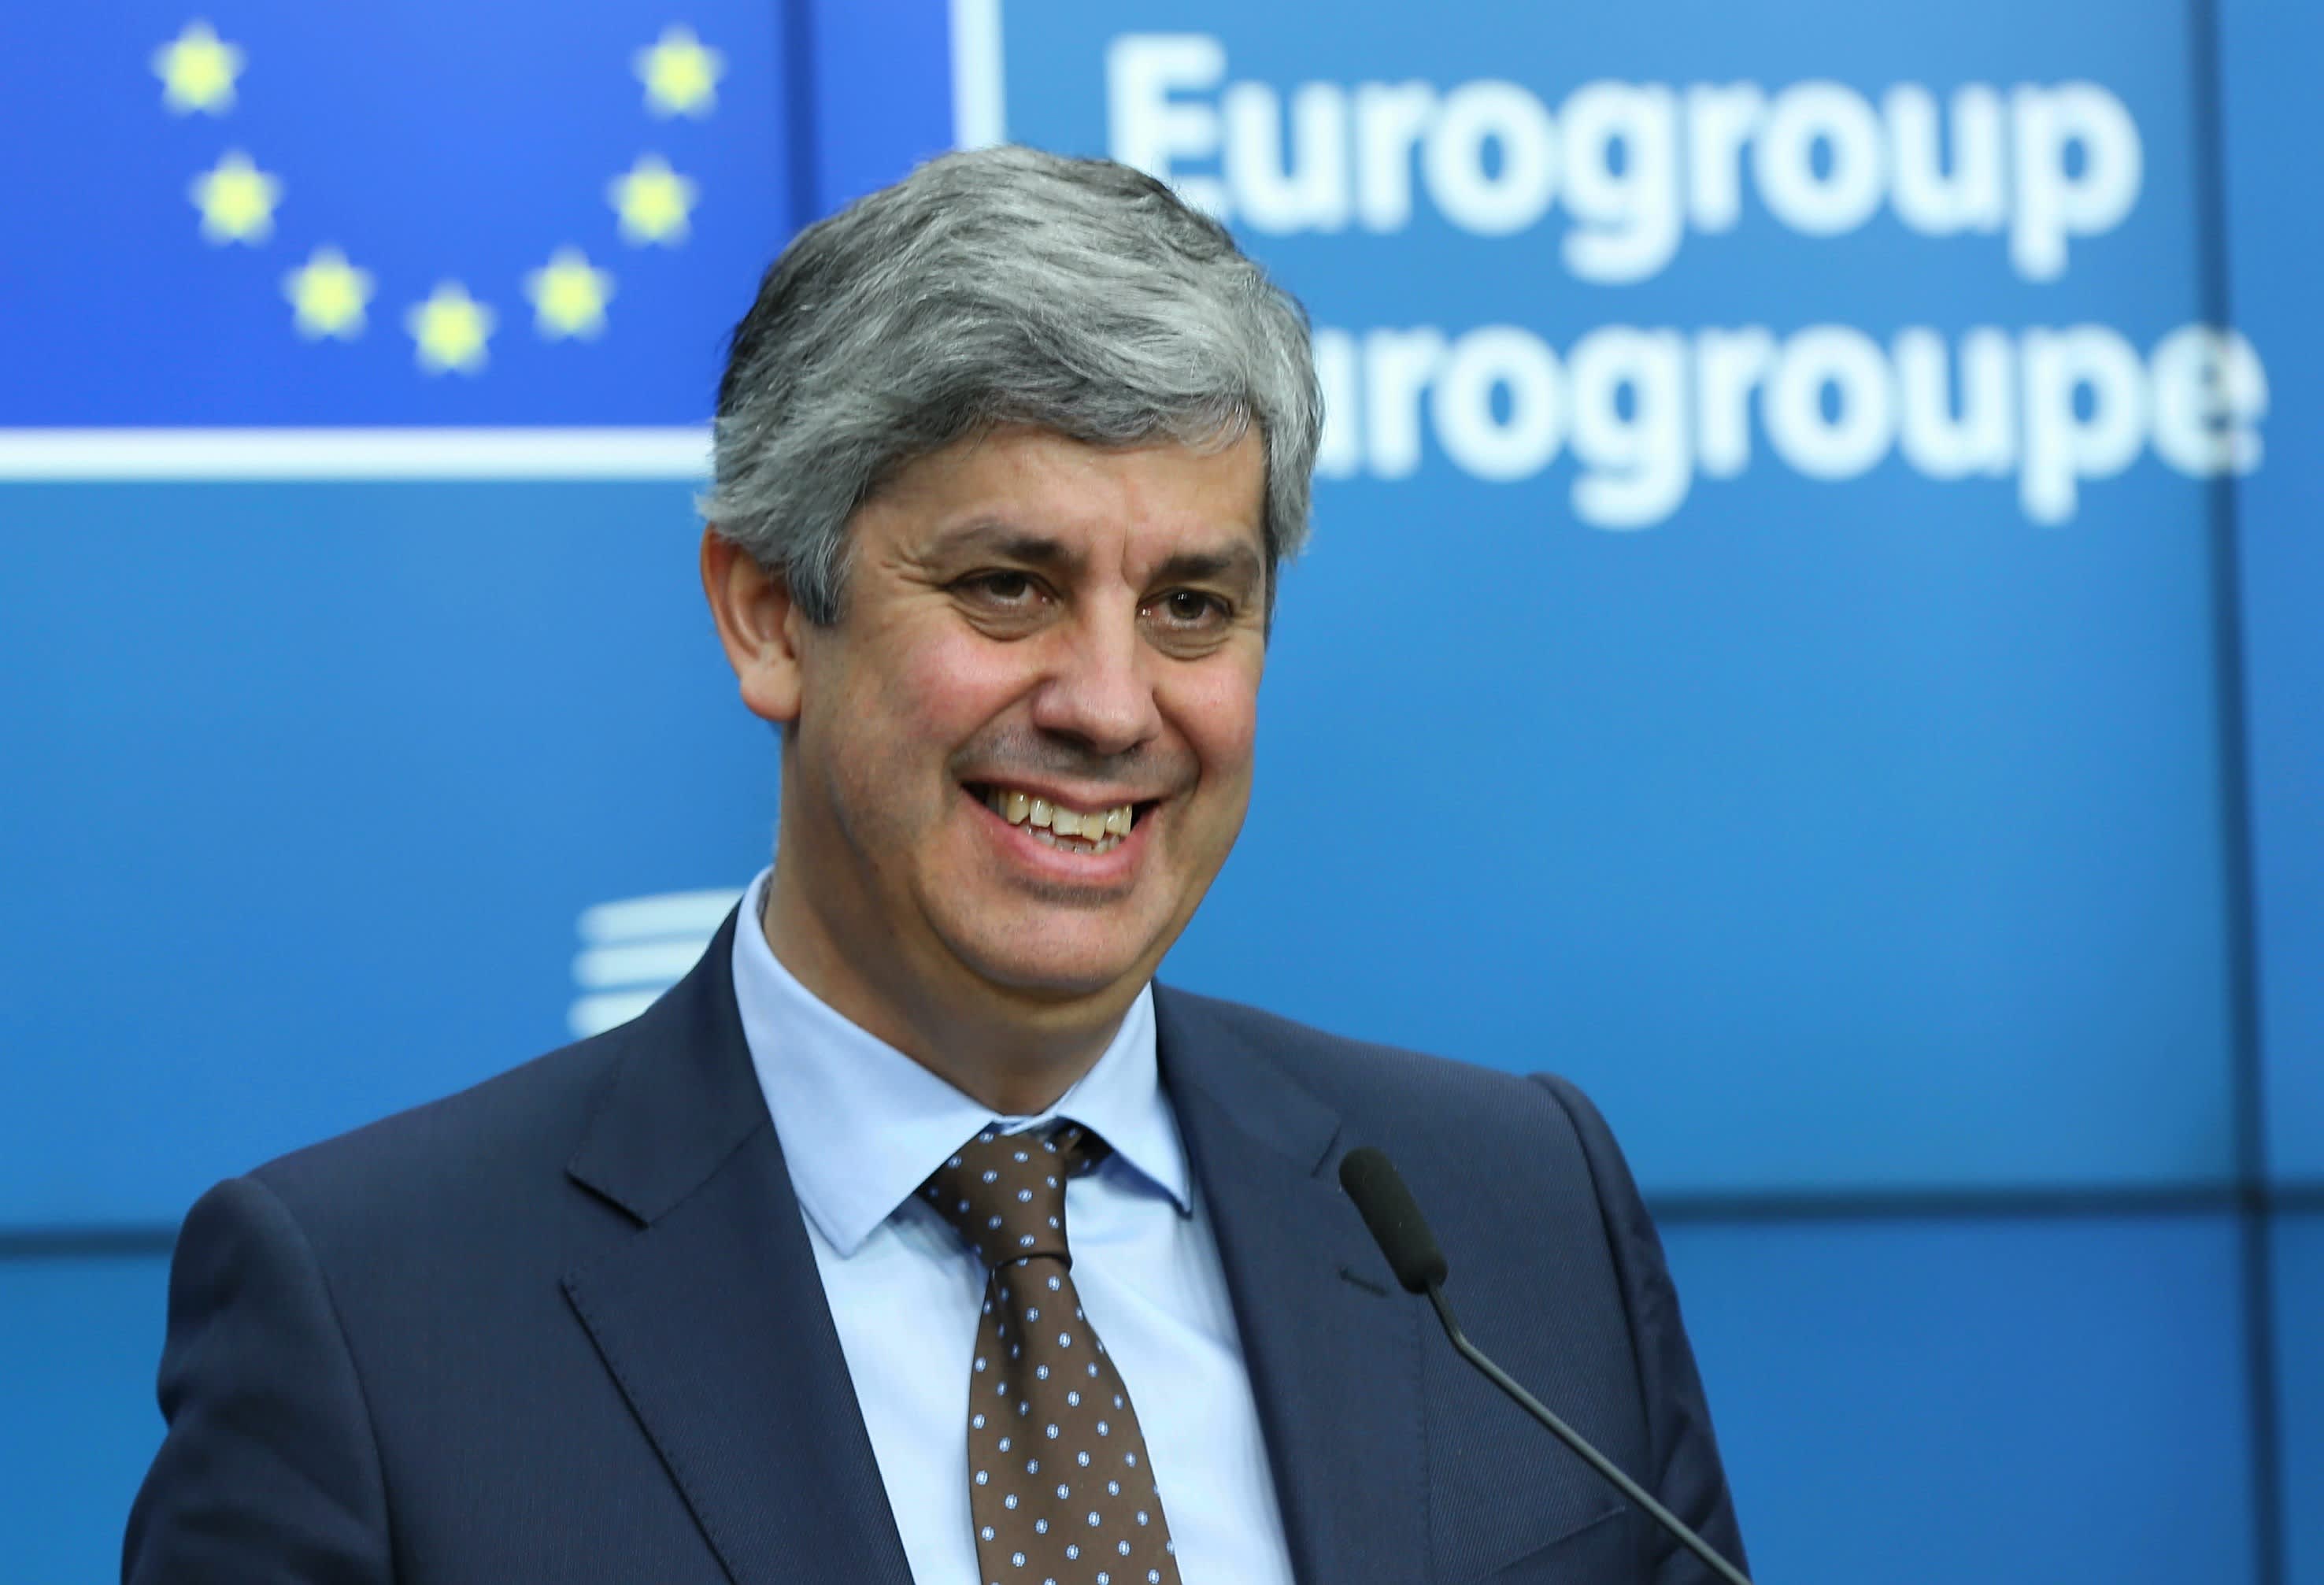 Eurogroup chief Mario Centeno promises a fresh response for the embattled region